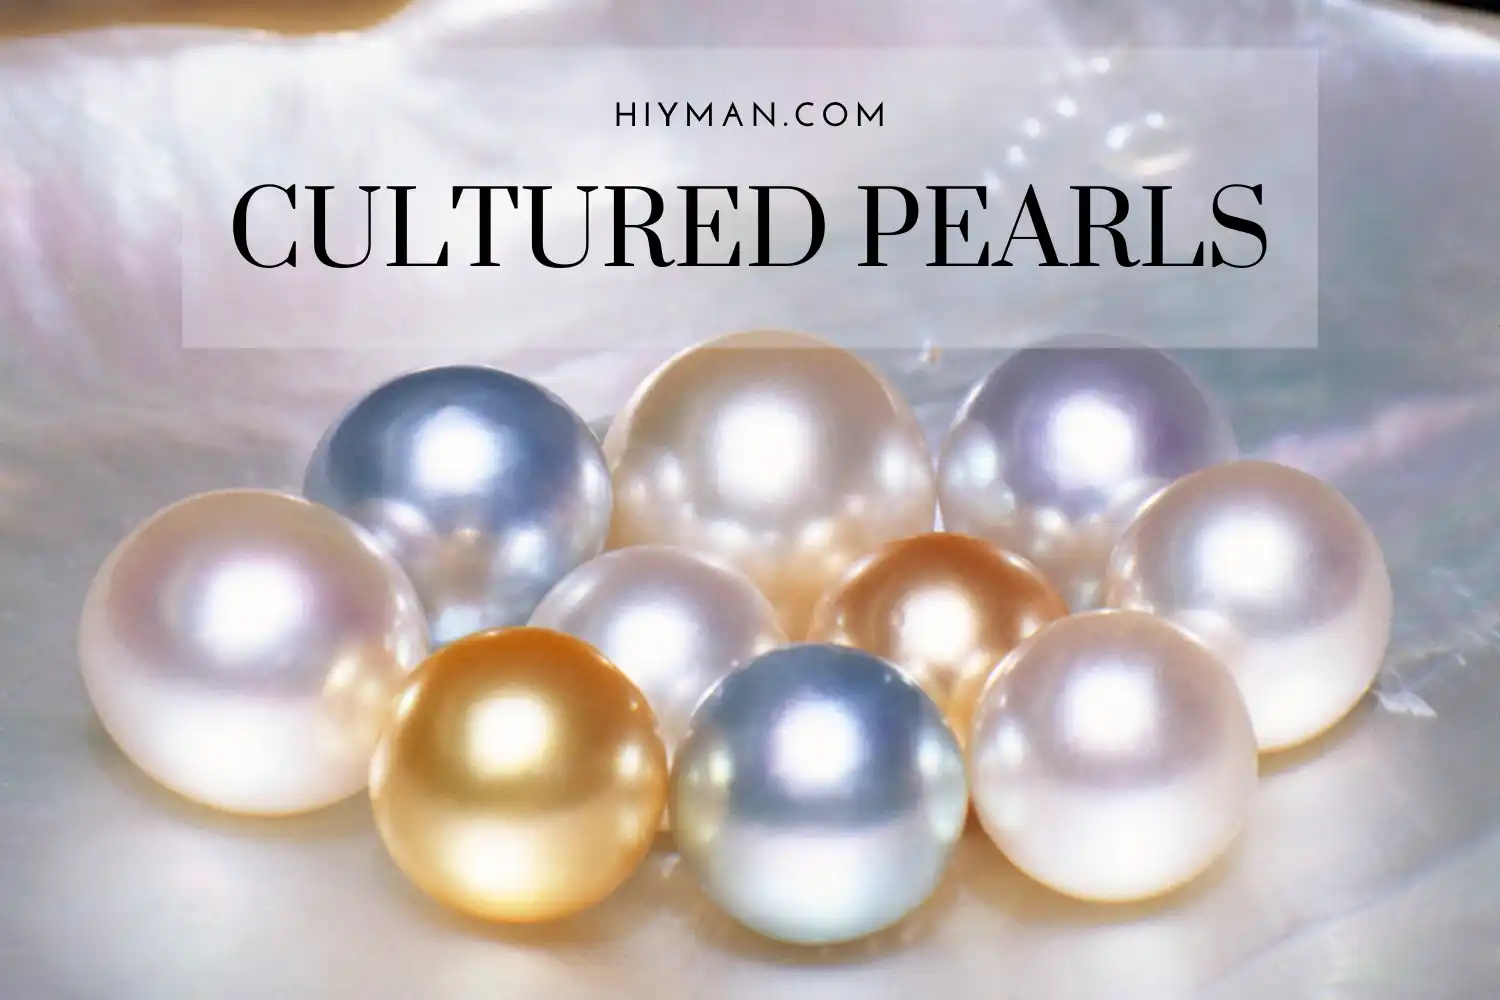 Do You Know Cultured Pearls?